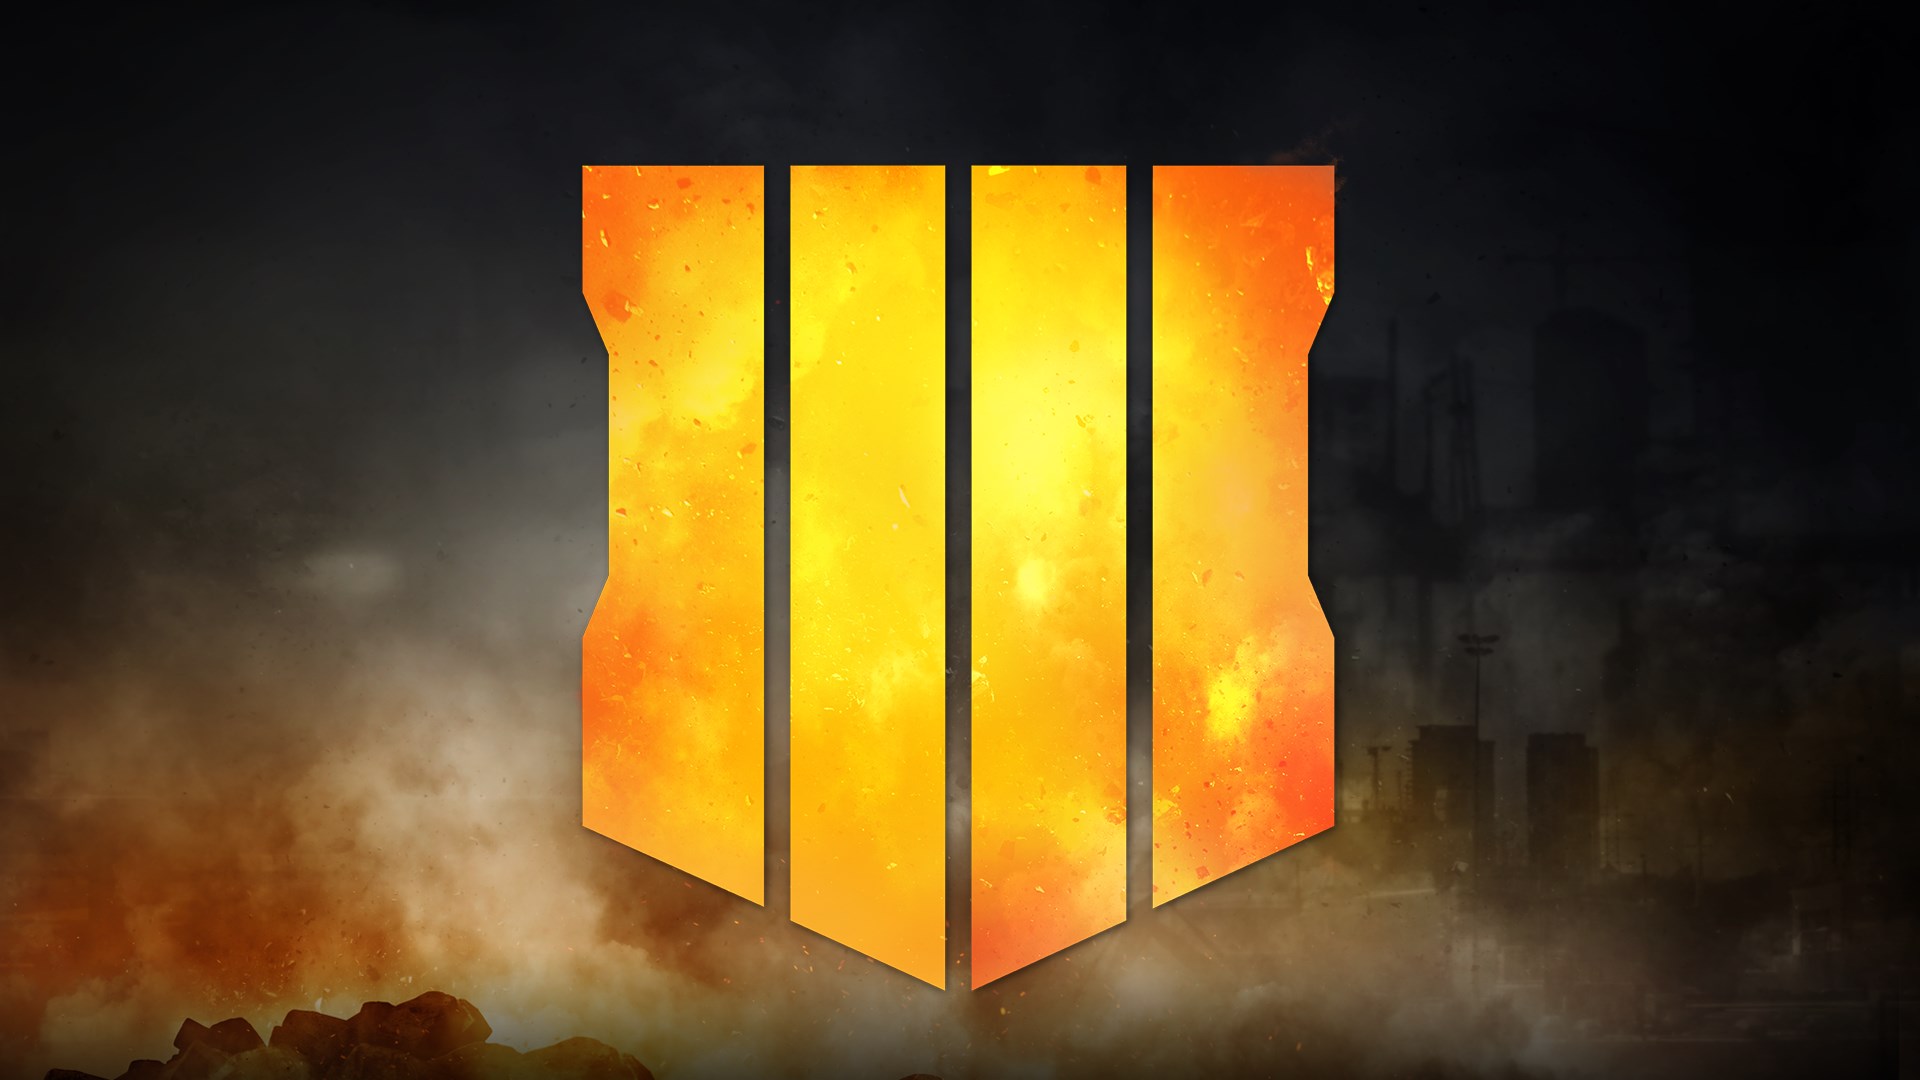 call of duty black ops 4 xbox one digital download